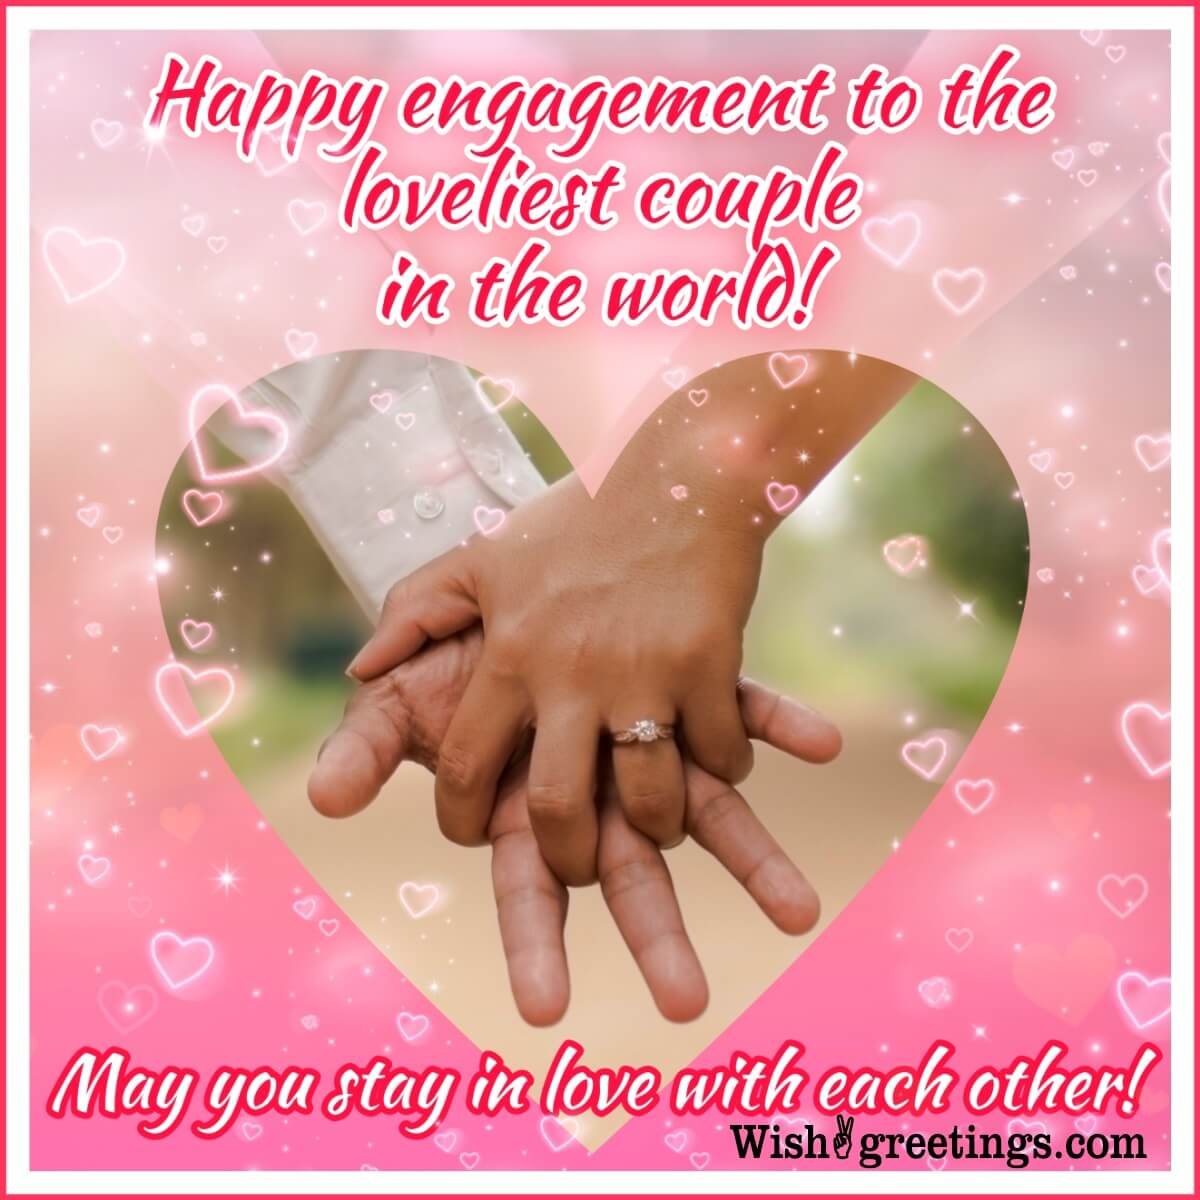 Engagement Wishes Images - Wish Greetings